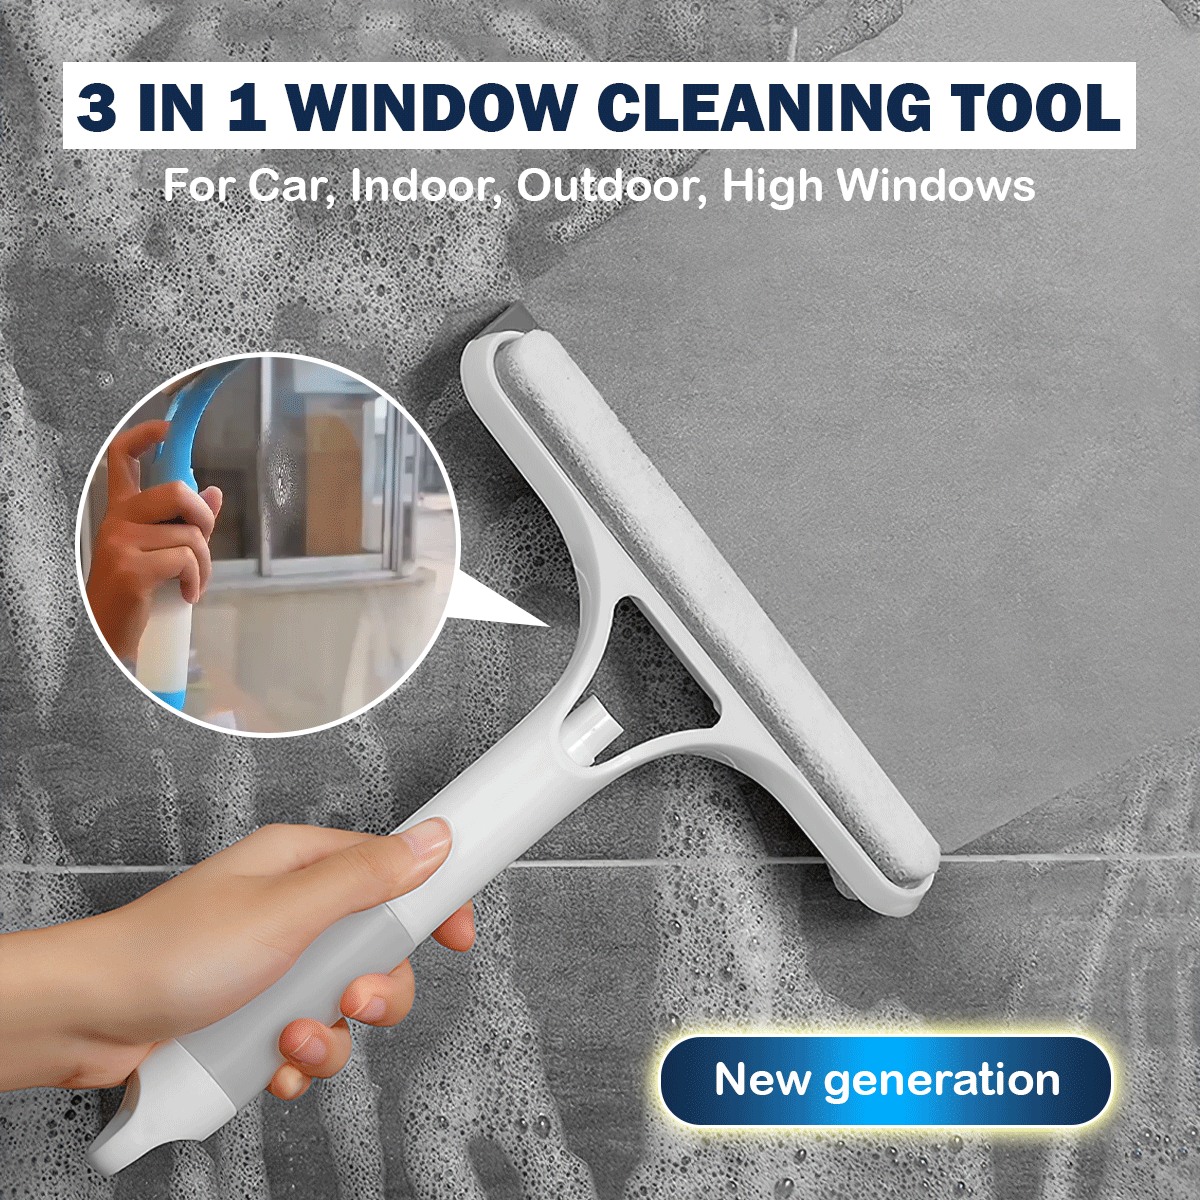 3-in-1 Window Cleaning Tool for Car Indoor Outdoor High Windows